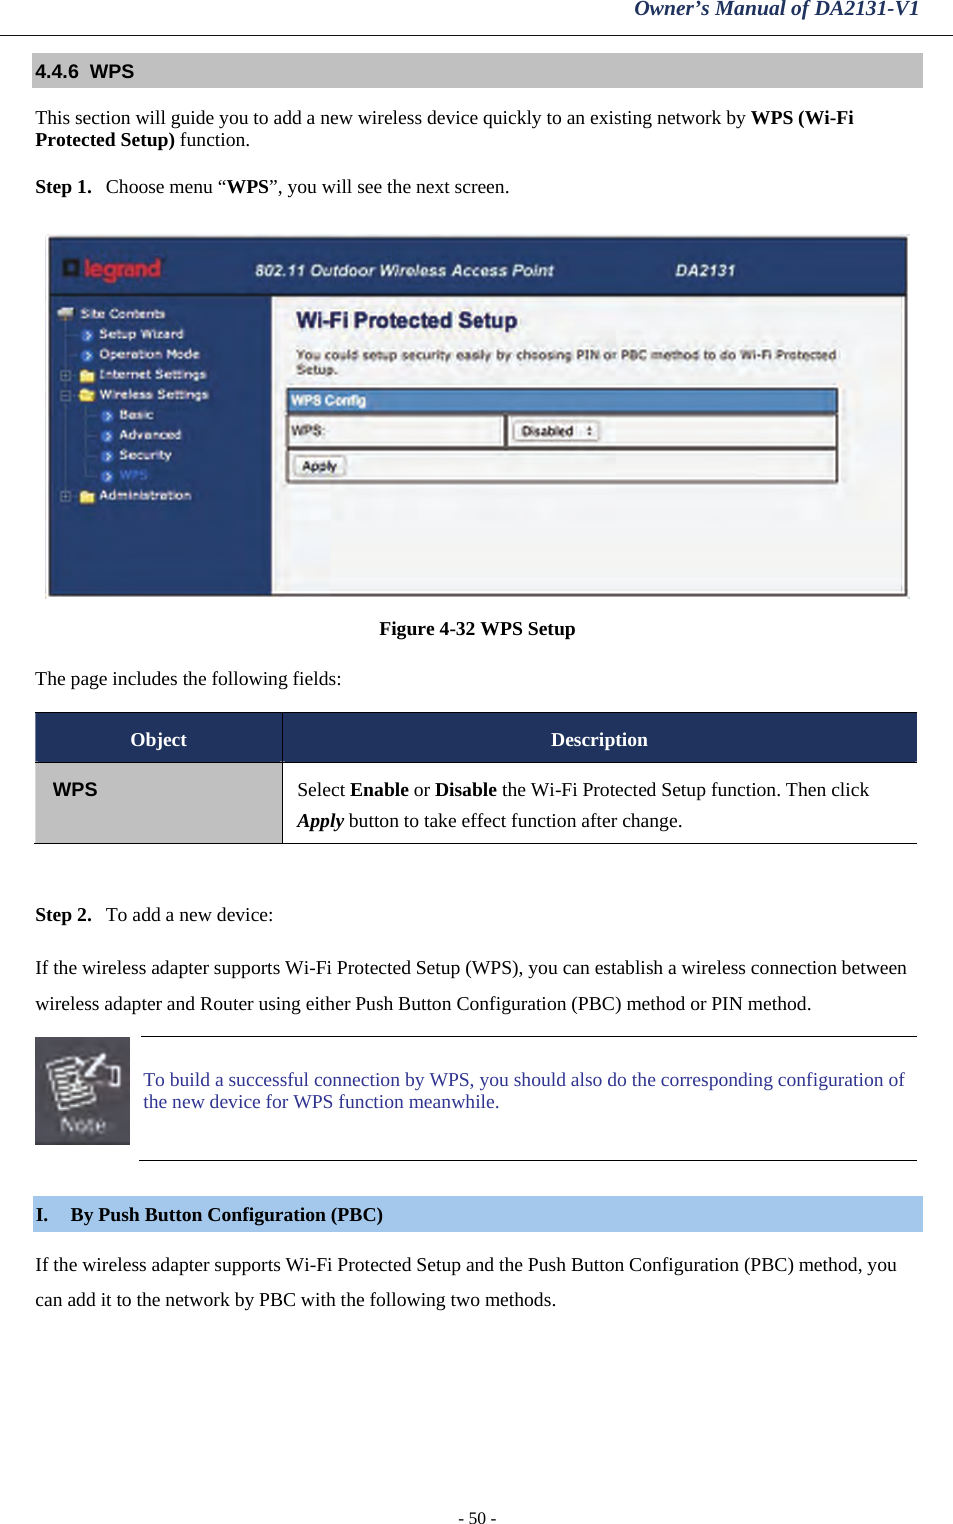 Owner’s Manual of DA2131-V1 - 50 - 4.4.6  WPS This section will guide you to add a new wireless device quickly to an existing network by WPS (Wi-Fi Protected Setup) function.  Step 1. Choose menu “WPS”, you will see the next screen.  Figure 4-32 WPS Setup The page includes the following fields: Object  Description WPS  Select Enable or Disable the Wi-Fi Protected Setup function. Then click Apply button to take effect function after change.  Step 2. To add a new device: If the wireless adapter supports Wi-Fi Protected Setup (WPS), you can establish a wireless connection between wireless adapter and Router using either Push Button Configuration (PBC) method or PIN method.  To build a successful connection by WPS, you should also do the corresponding configuration of the new device for WPS function meanwhile.  I. By Push Button Configuration (PBC) If the wireless adapter supports Wi-Fi Protected Setup and the Push Button Configuration (PBC) method, you can add it to the network by PBC with the following two methods.  